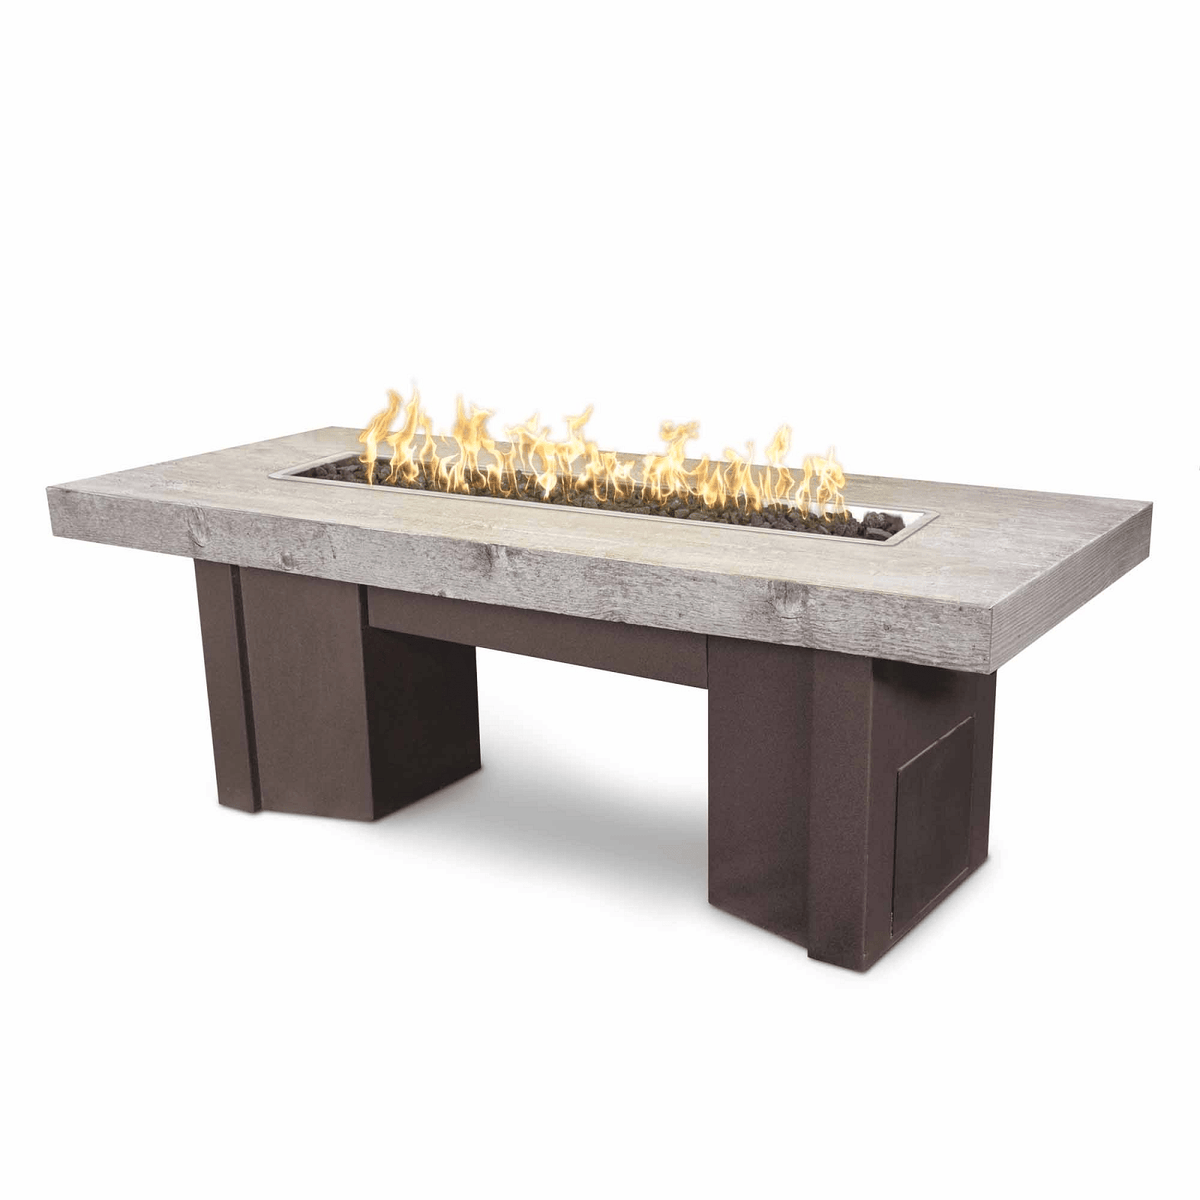 The Outdoor Plus Fire Features The Outdoor Plus 60&quot; Alameda Fire Table Wood Grain - Flame Sense System with Push Button Spark Igniter / OPT-ALMWG60FSEN